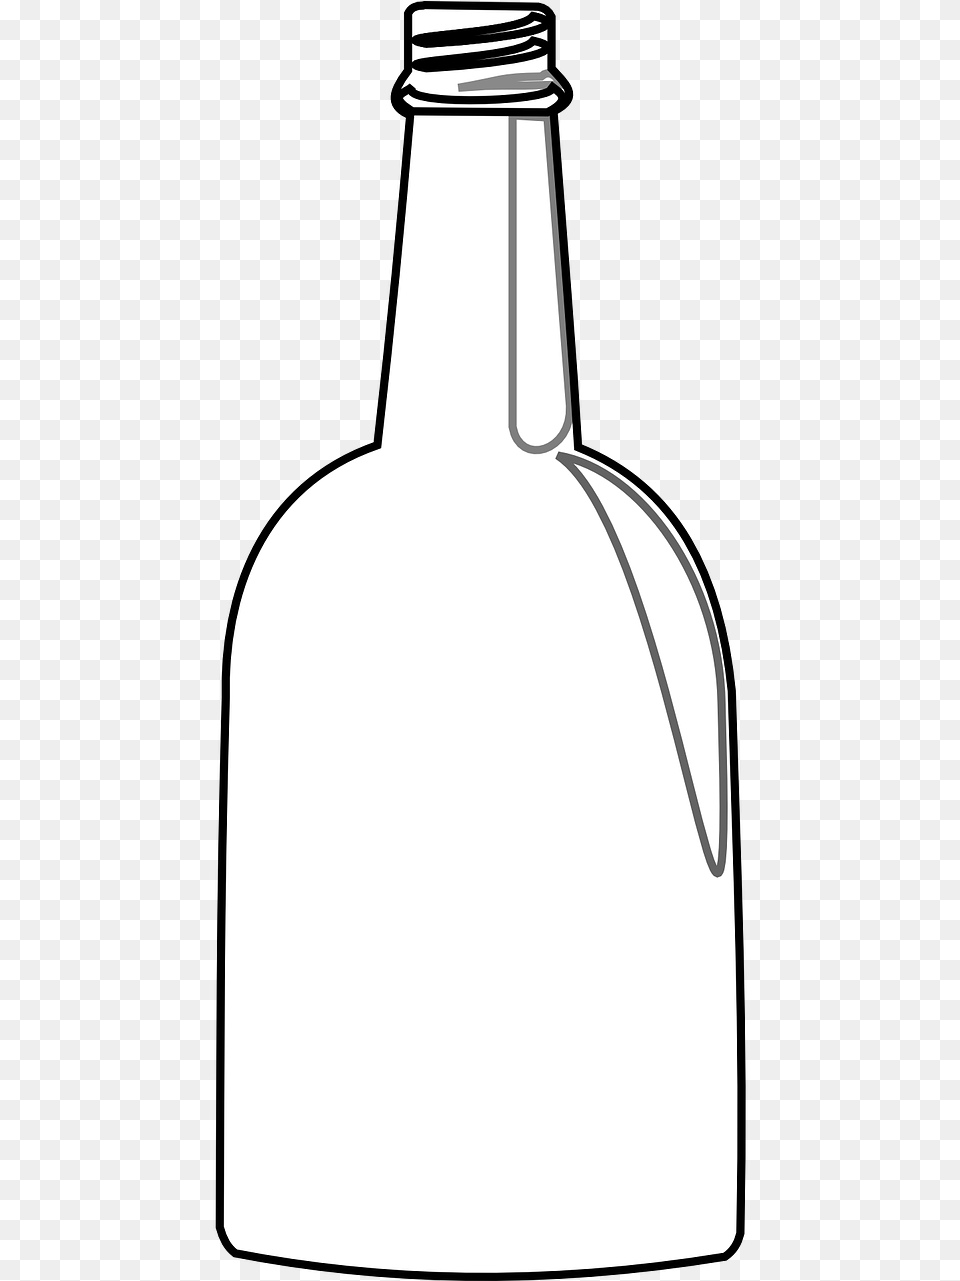 Bottle Water Glass Photo Champagne Bottle Outline Free Transparent Png